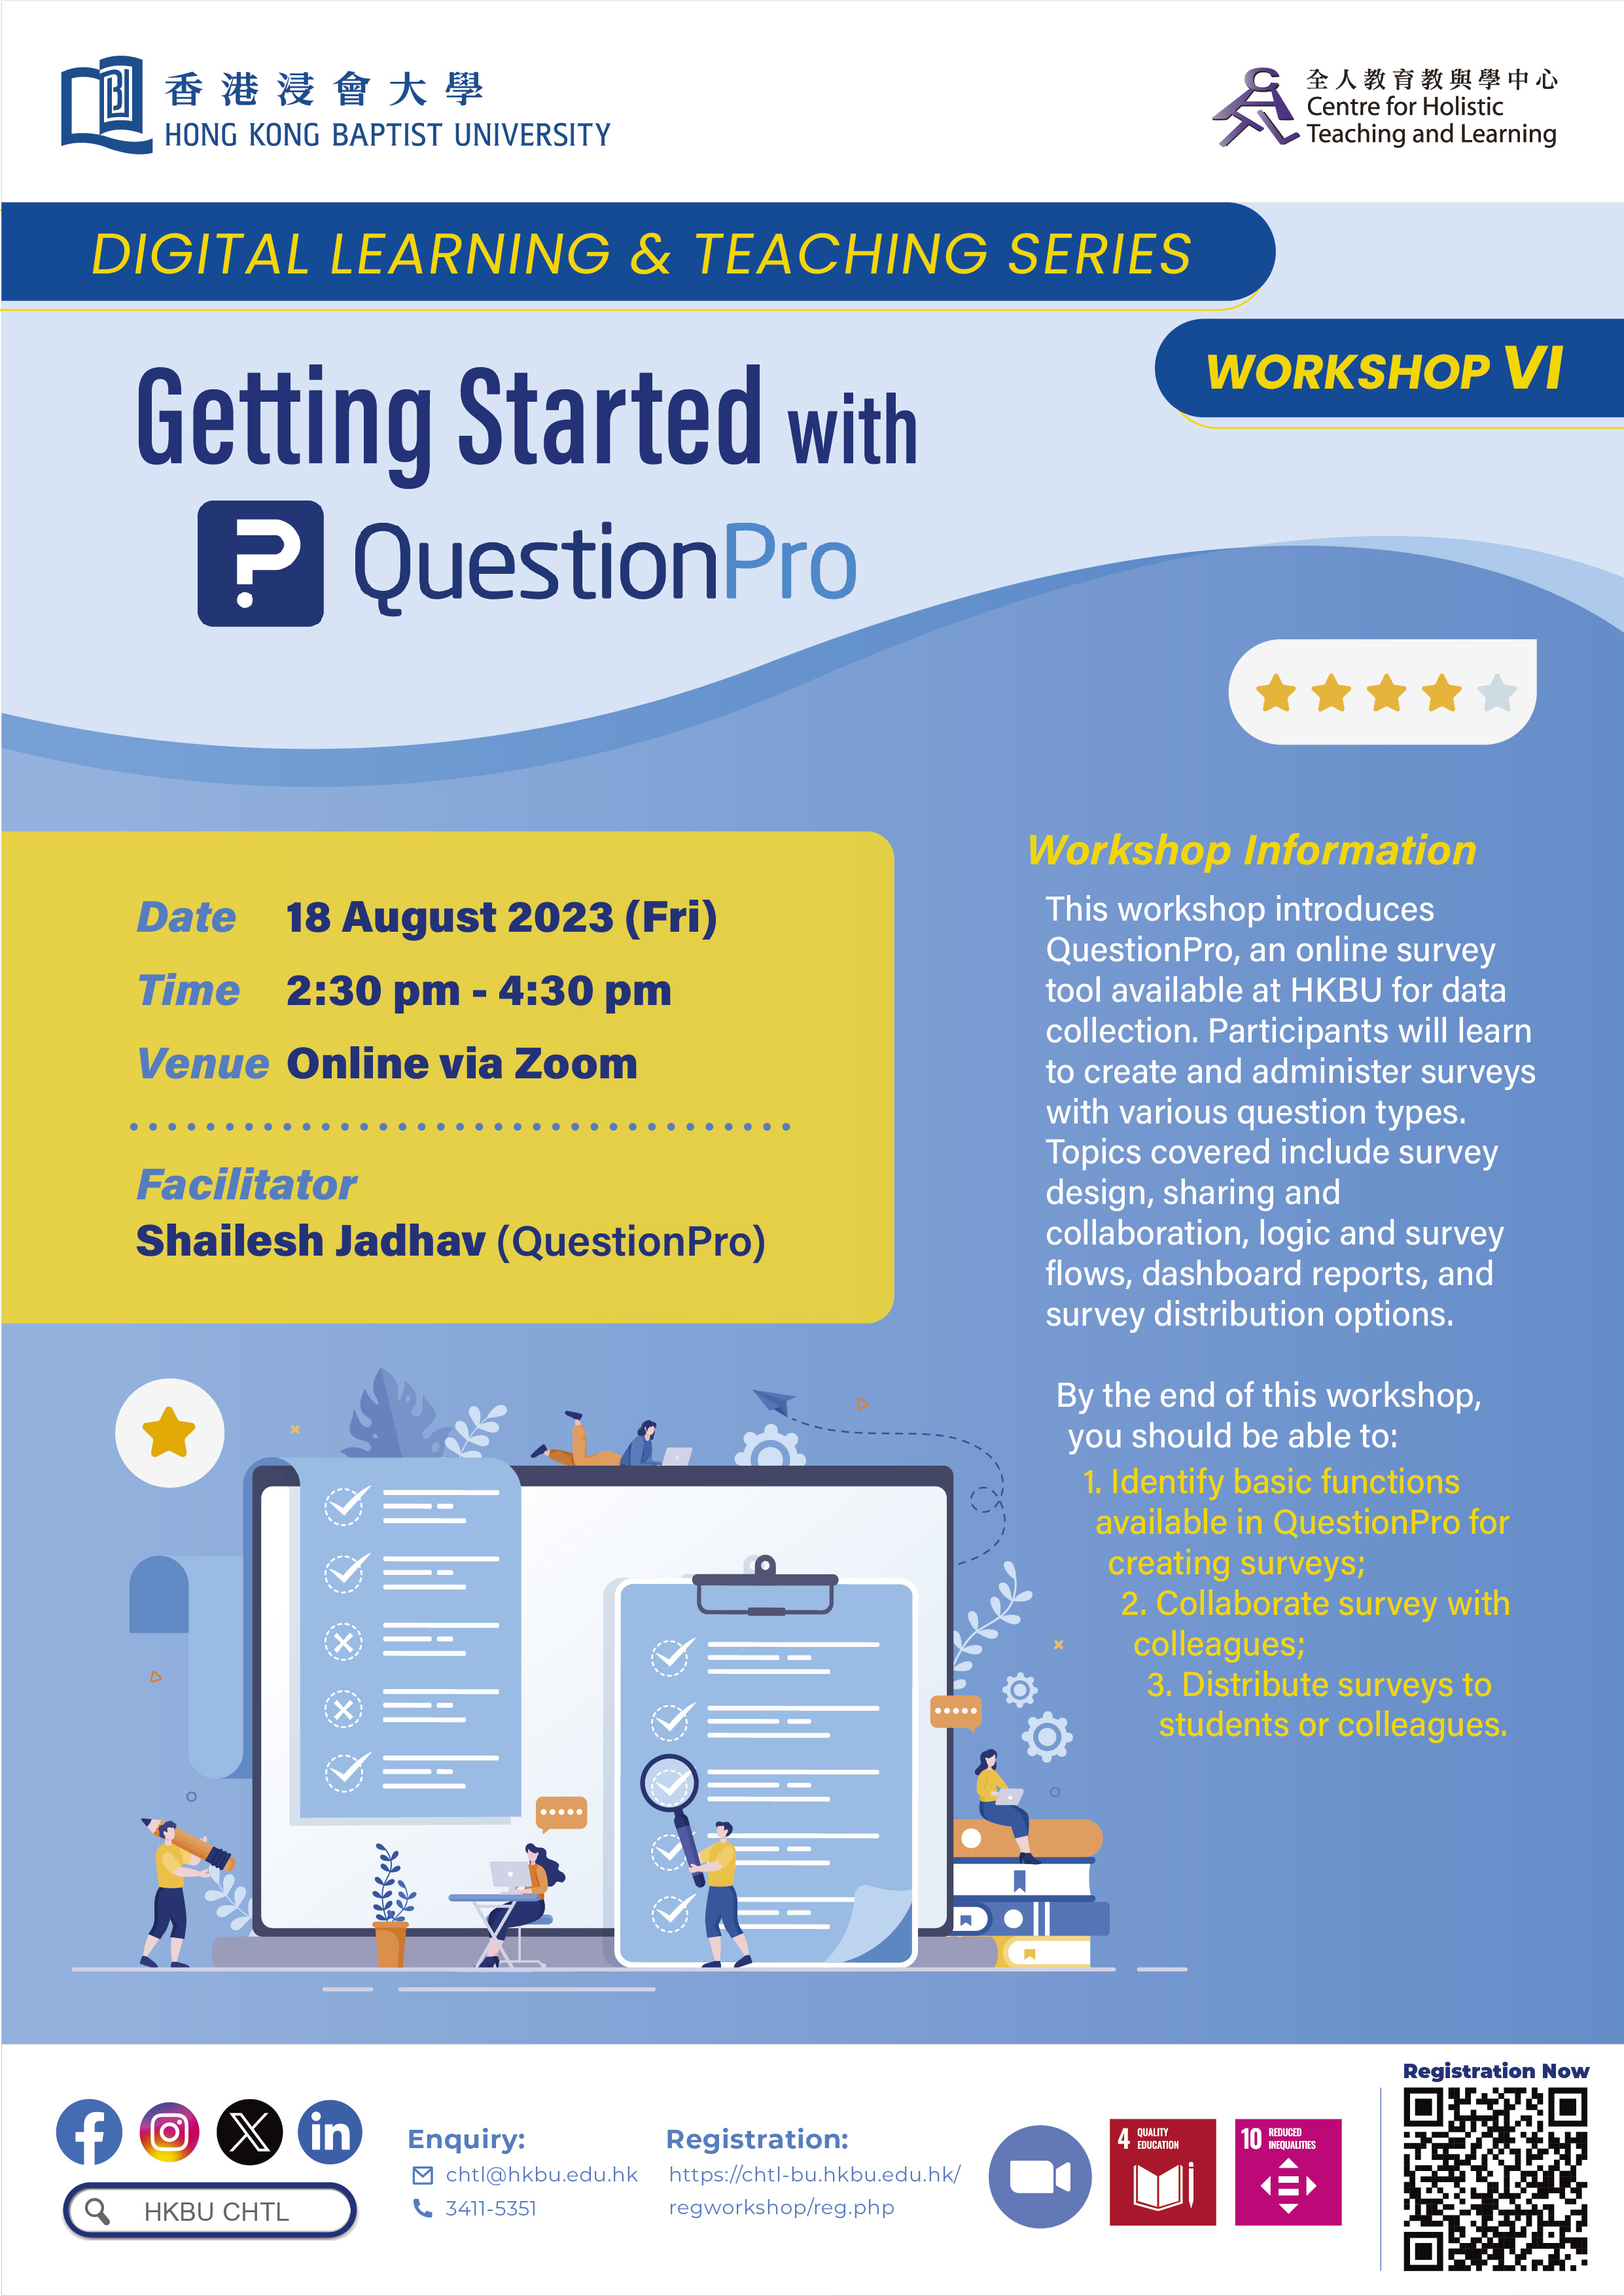 Workshop VI: Getting Started with QuestionPro